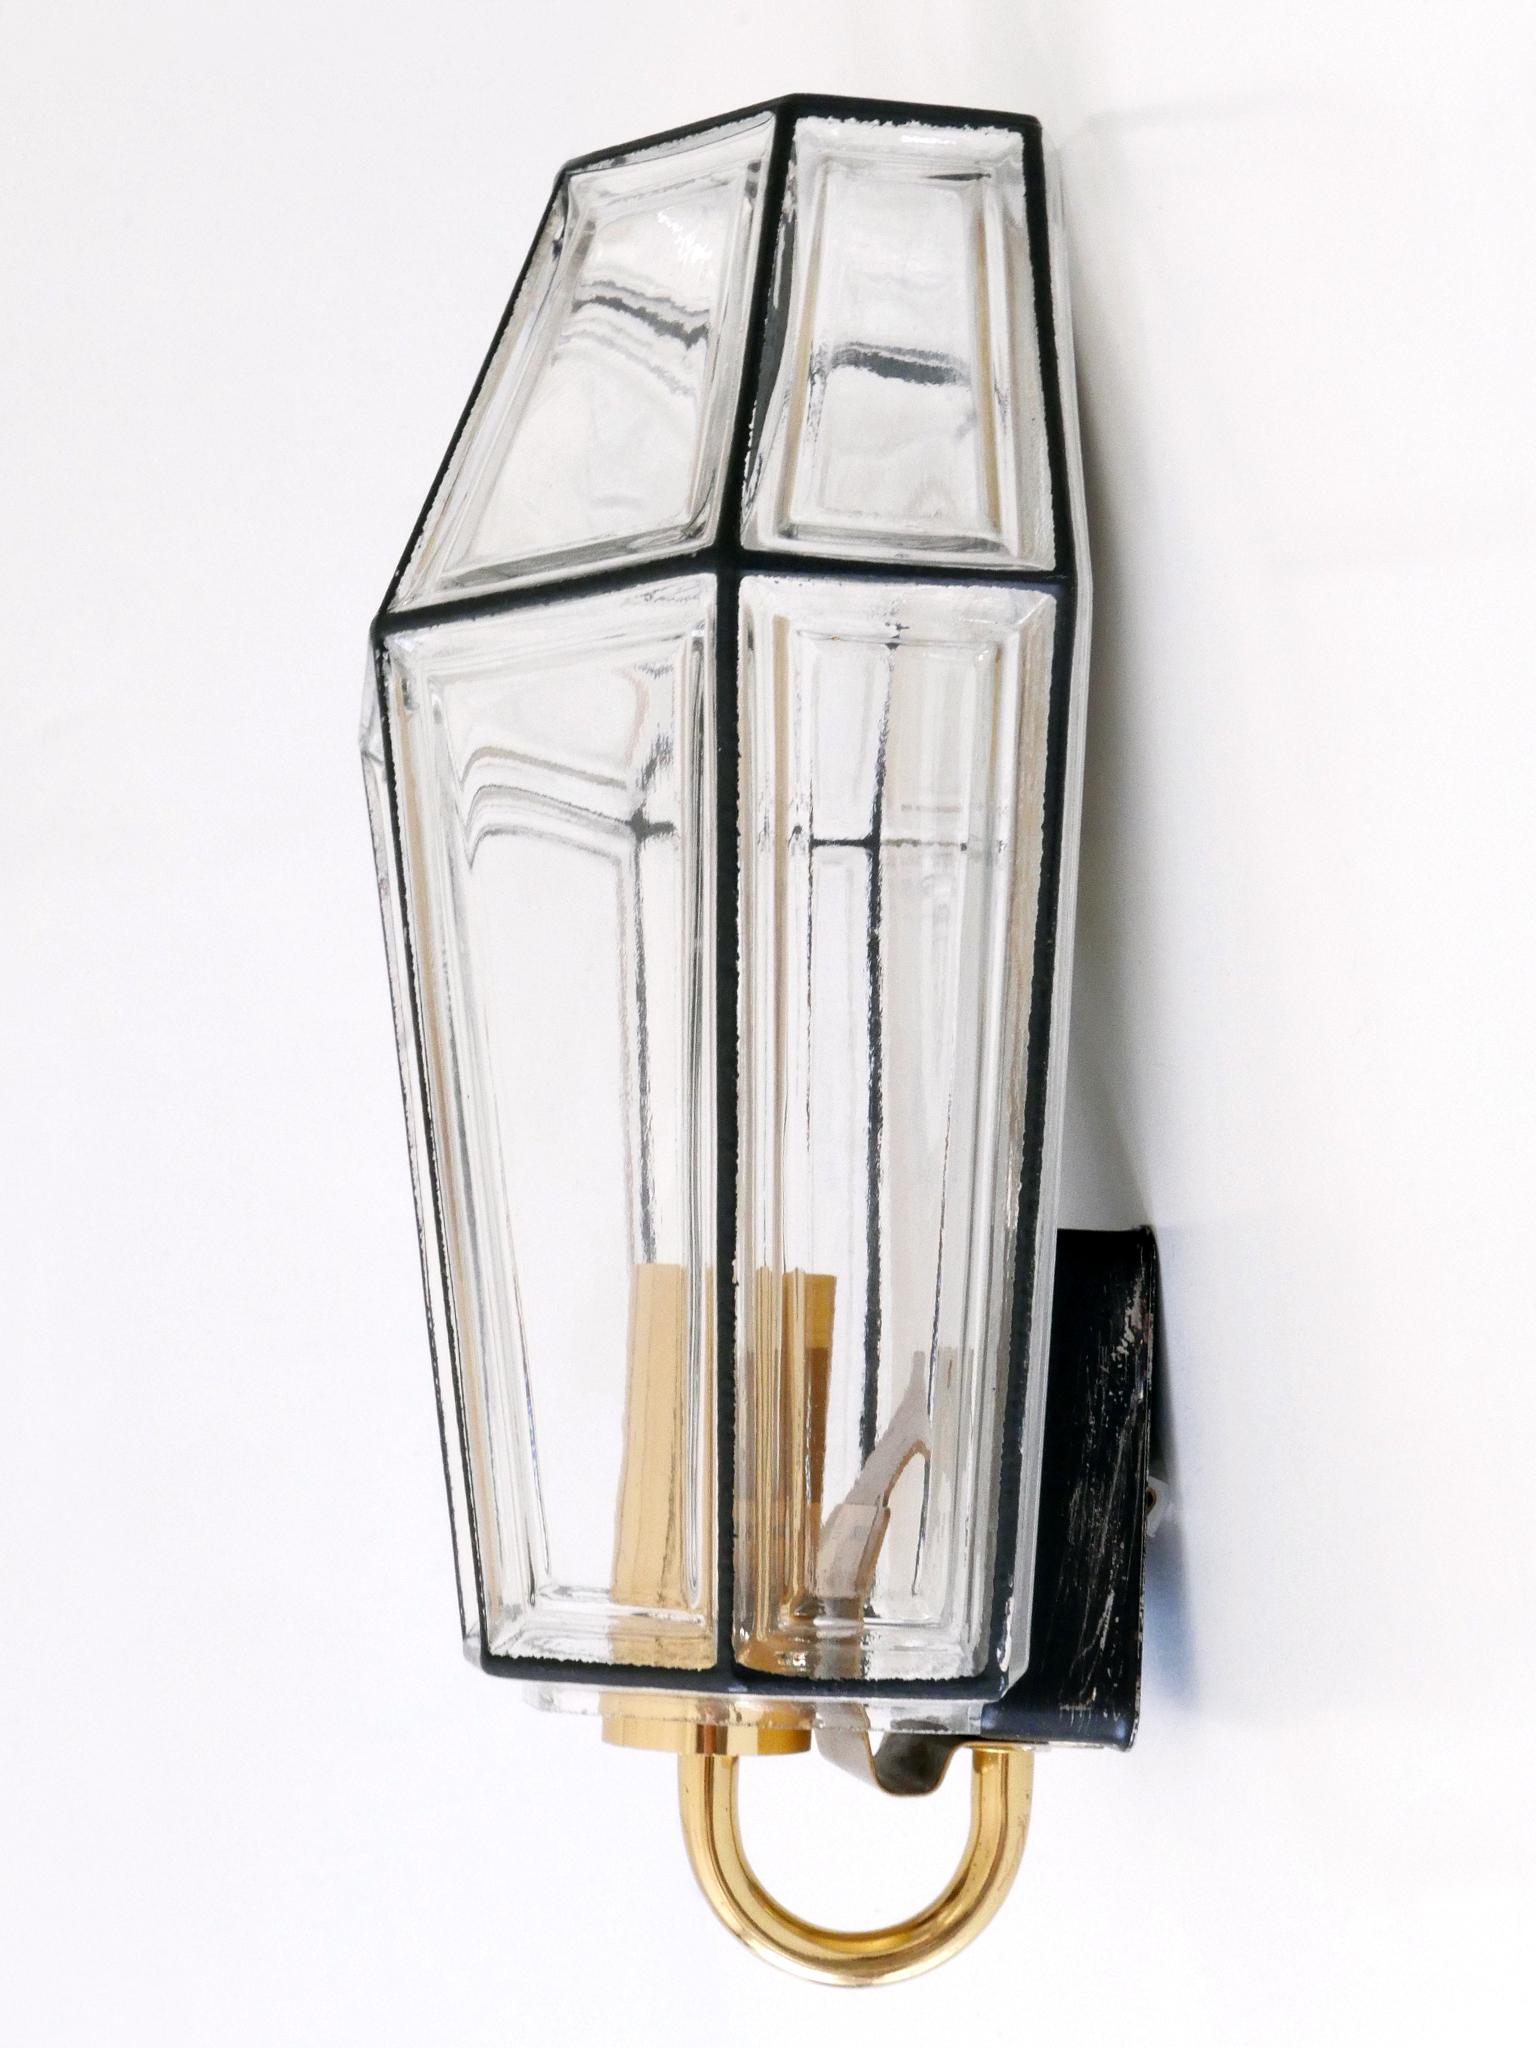 Set of Two Mid-Century Modern Sconces or Wall Fixtures by Glashütte Limburg For Sale 10